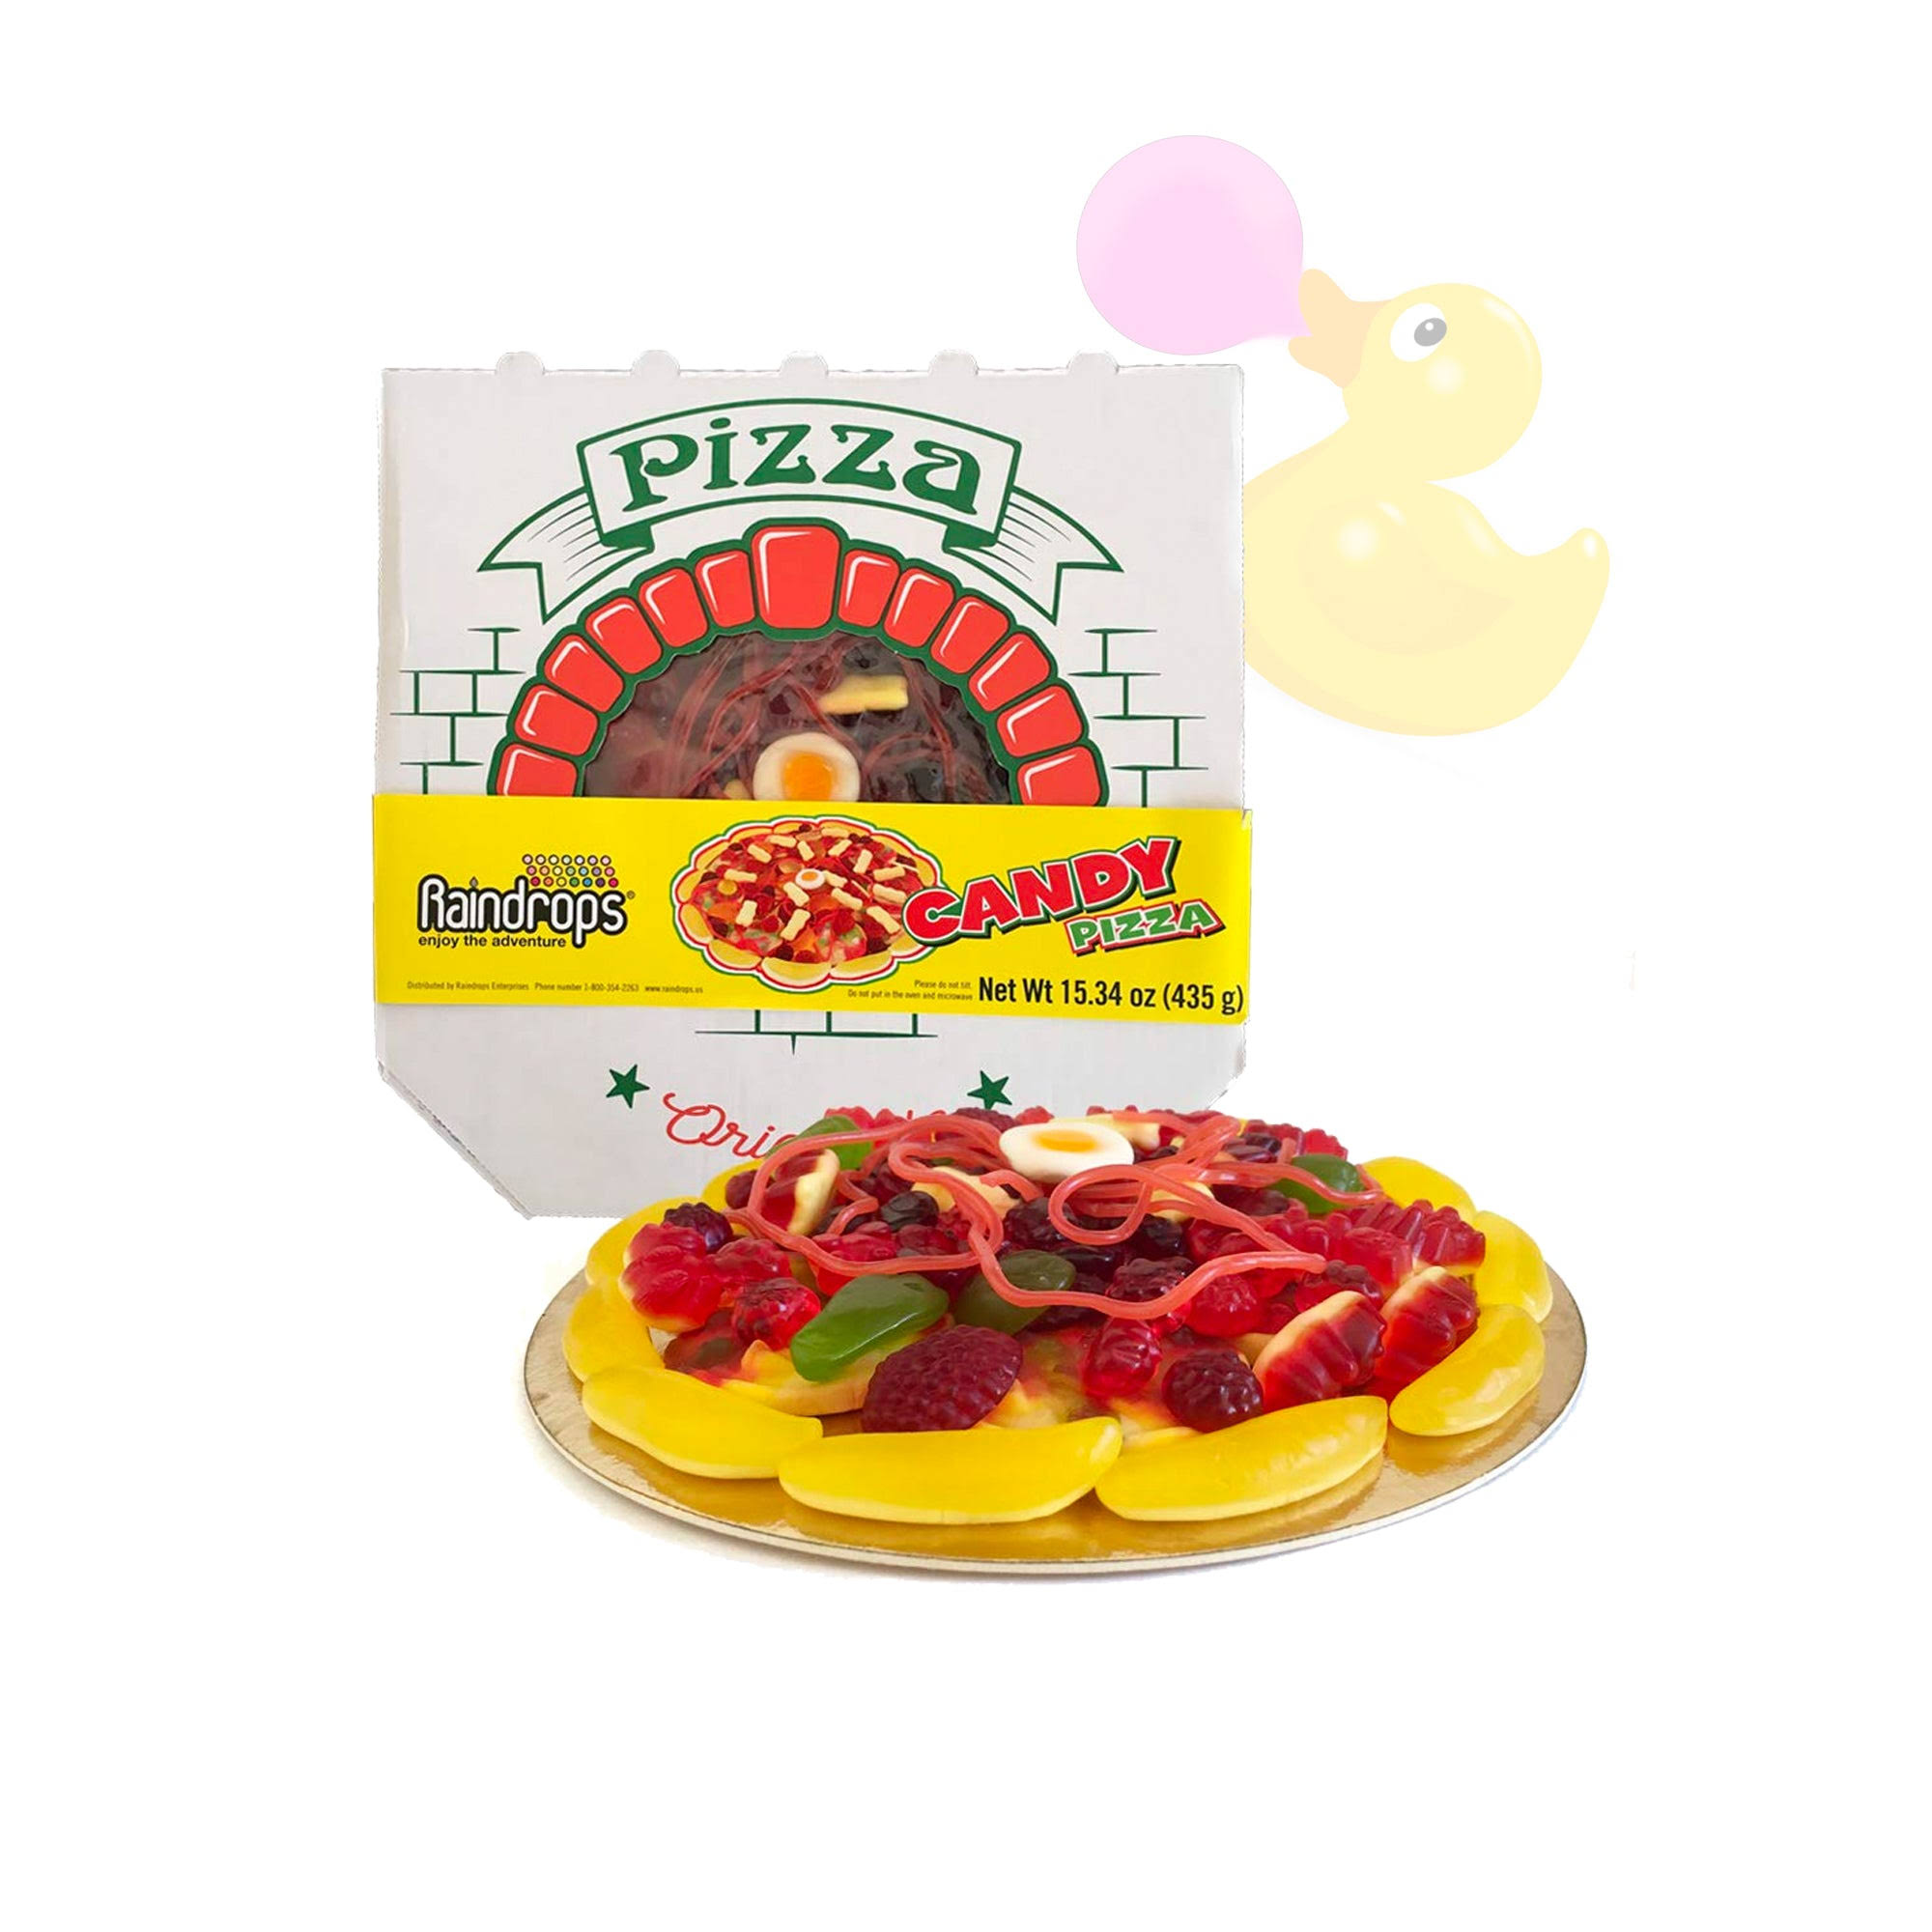 Raindrops Gummy Candy Pizza - 4.5 Mini Pizza with 18 Pieces of Candy P